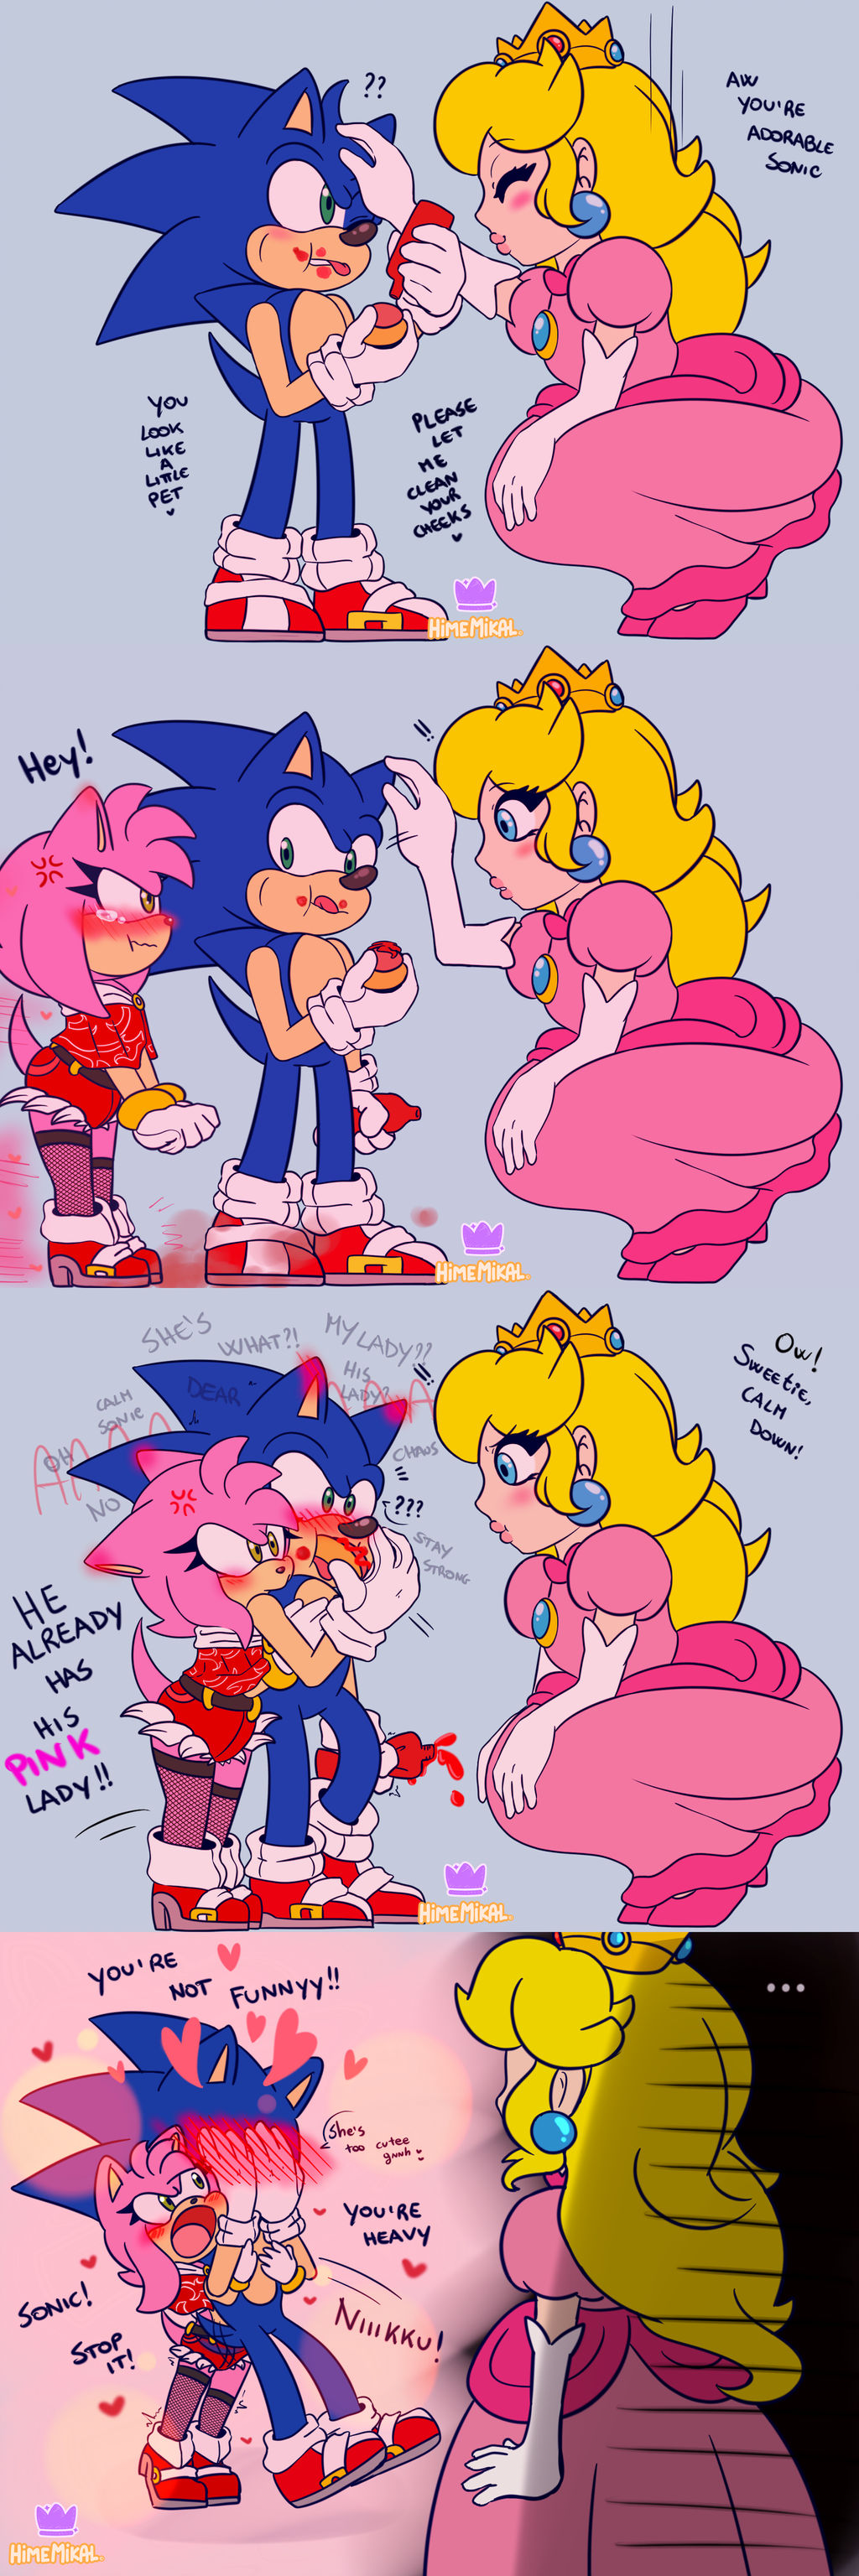 sonamy regrets and mistakes: pg 48 by Cakeklis on DeviantArt